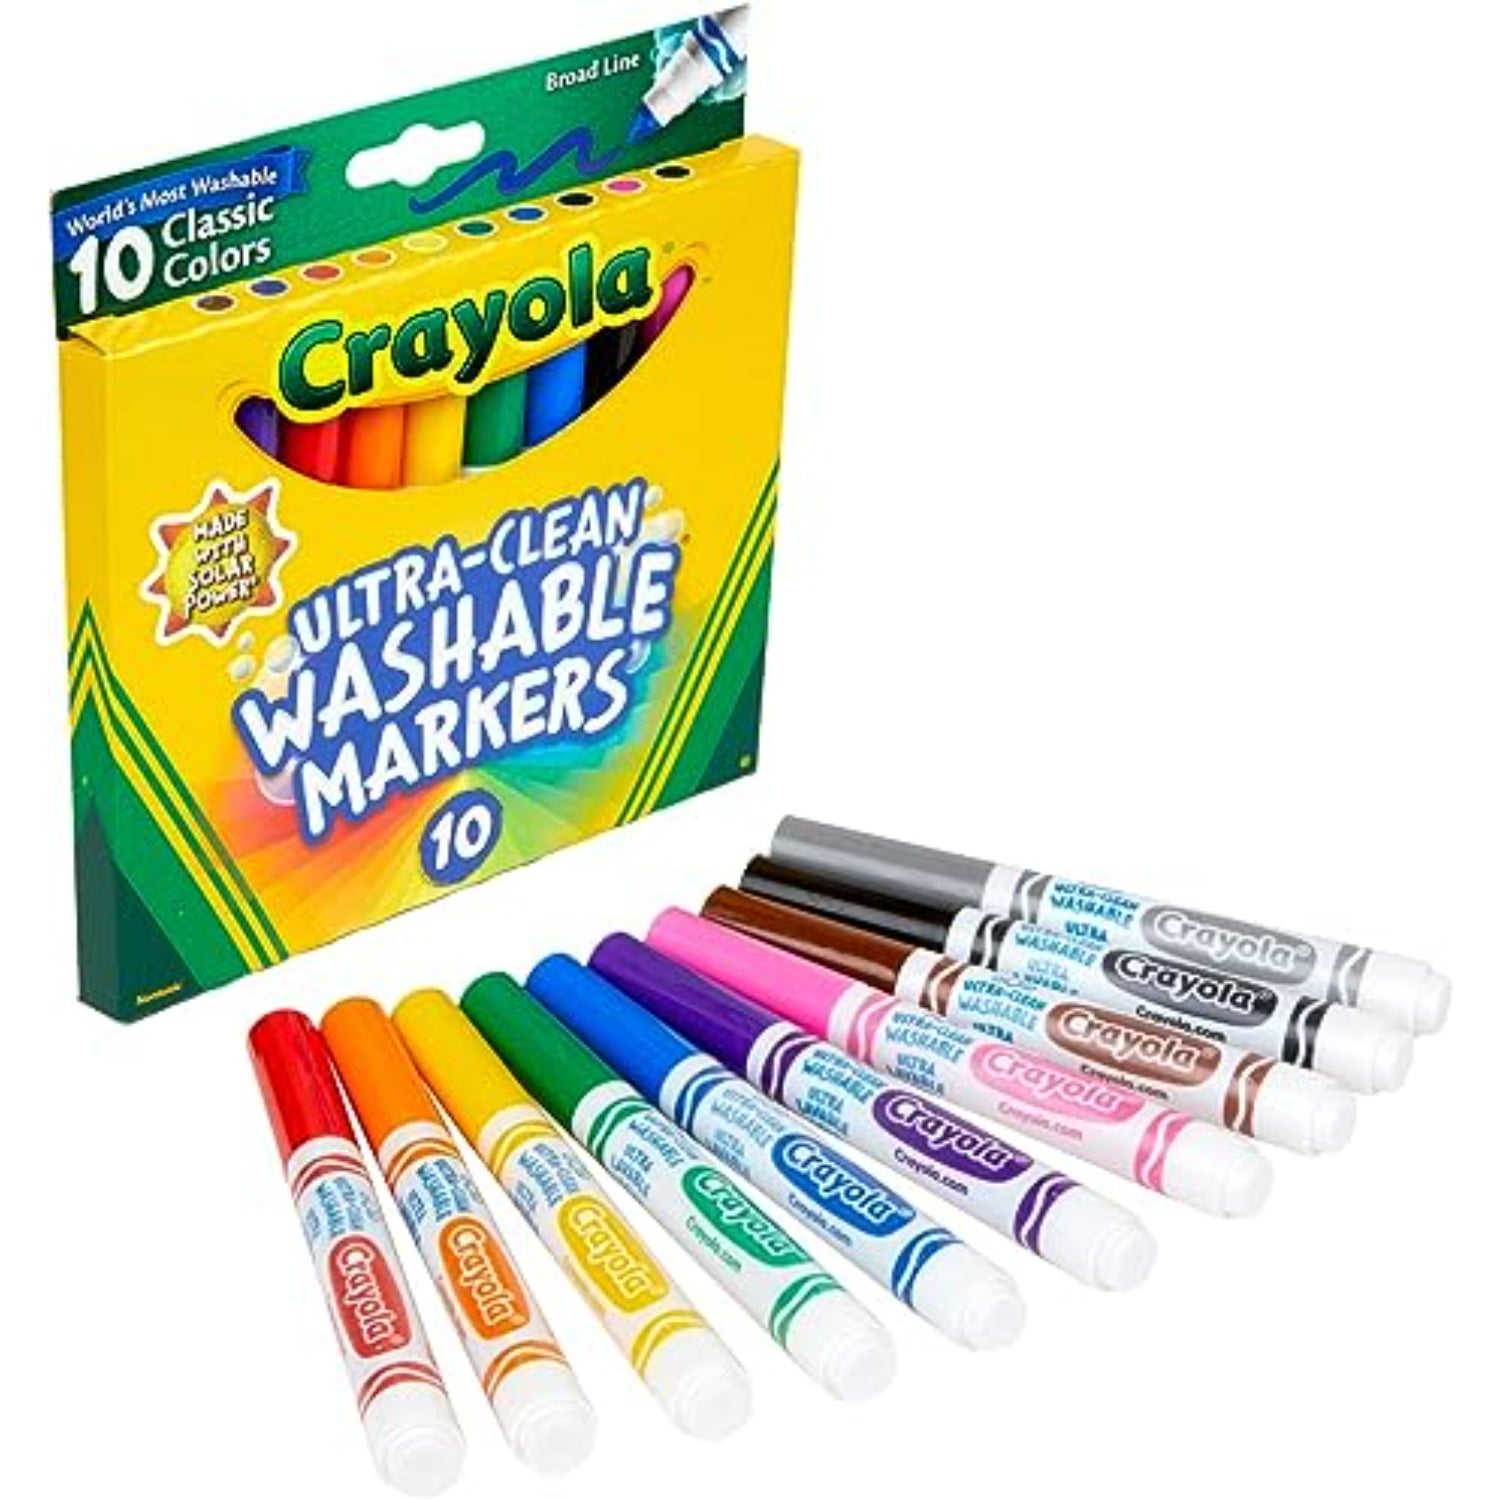 Ultra-Clean Markers, Broad Line, Bright, 10 ct.